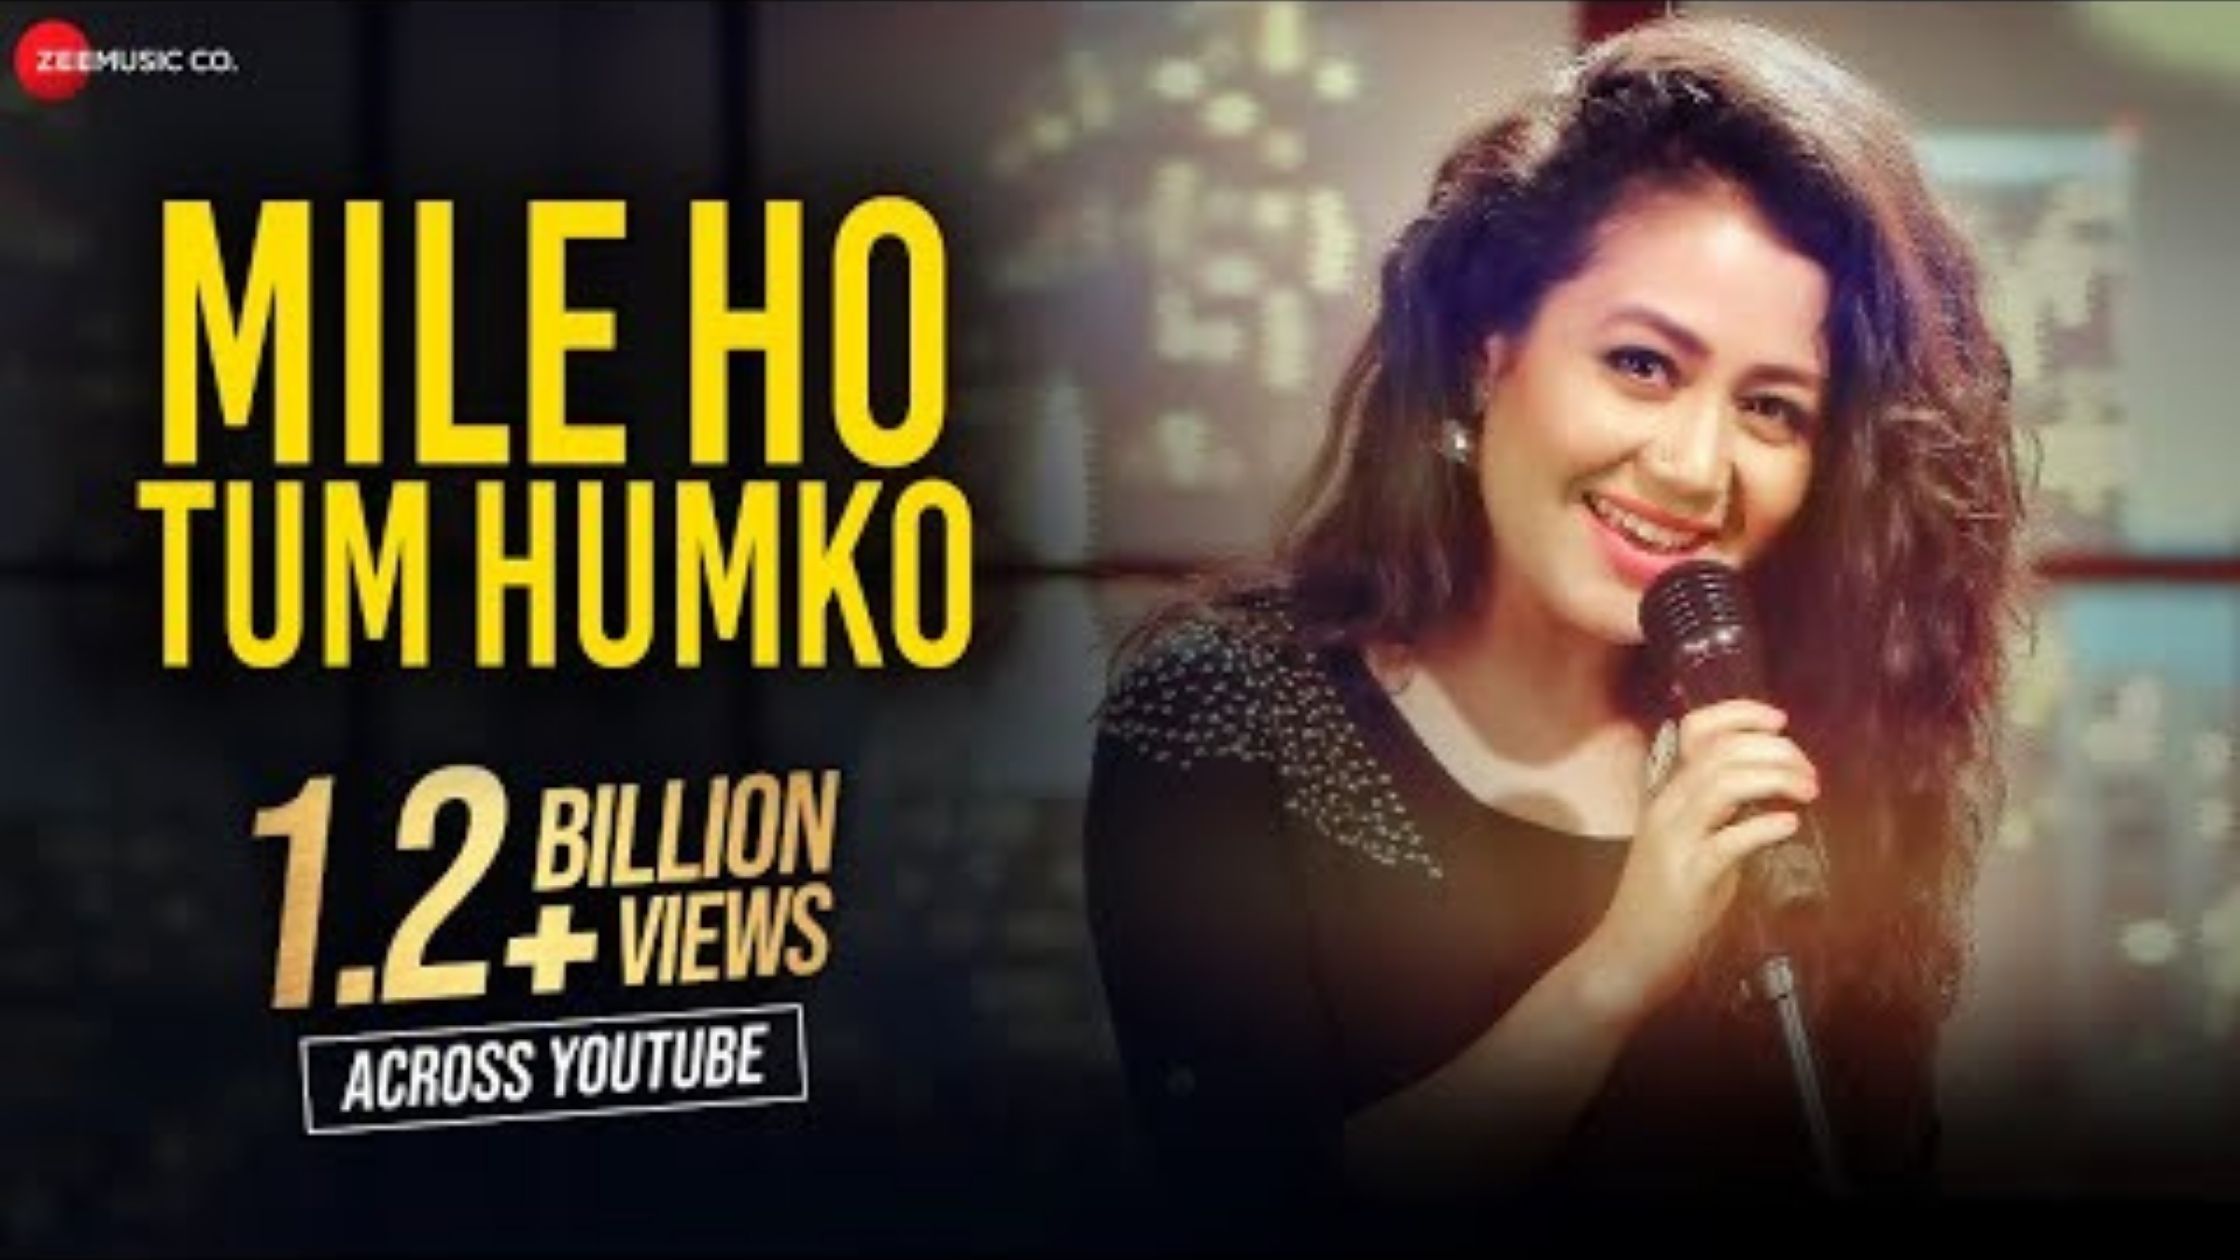 MILE HO TUM HUMKO BECOMES FIRST VIDEO TO REACH 1 BILLION